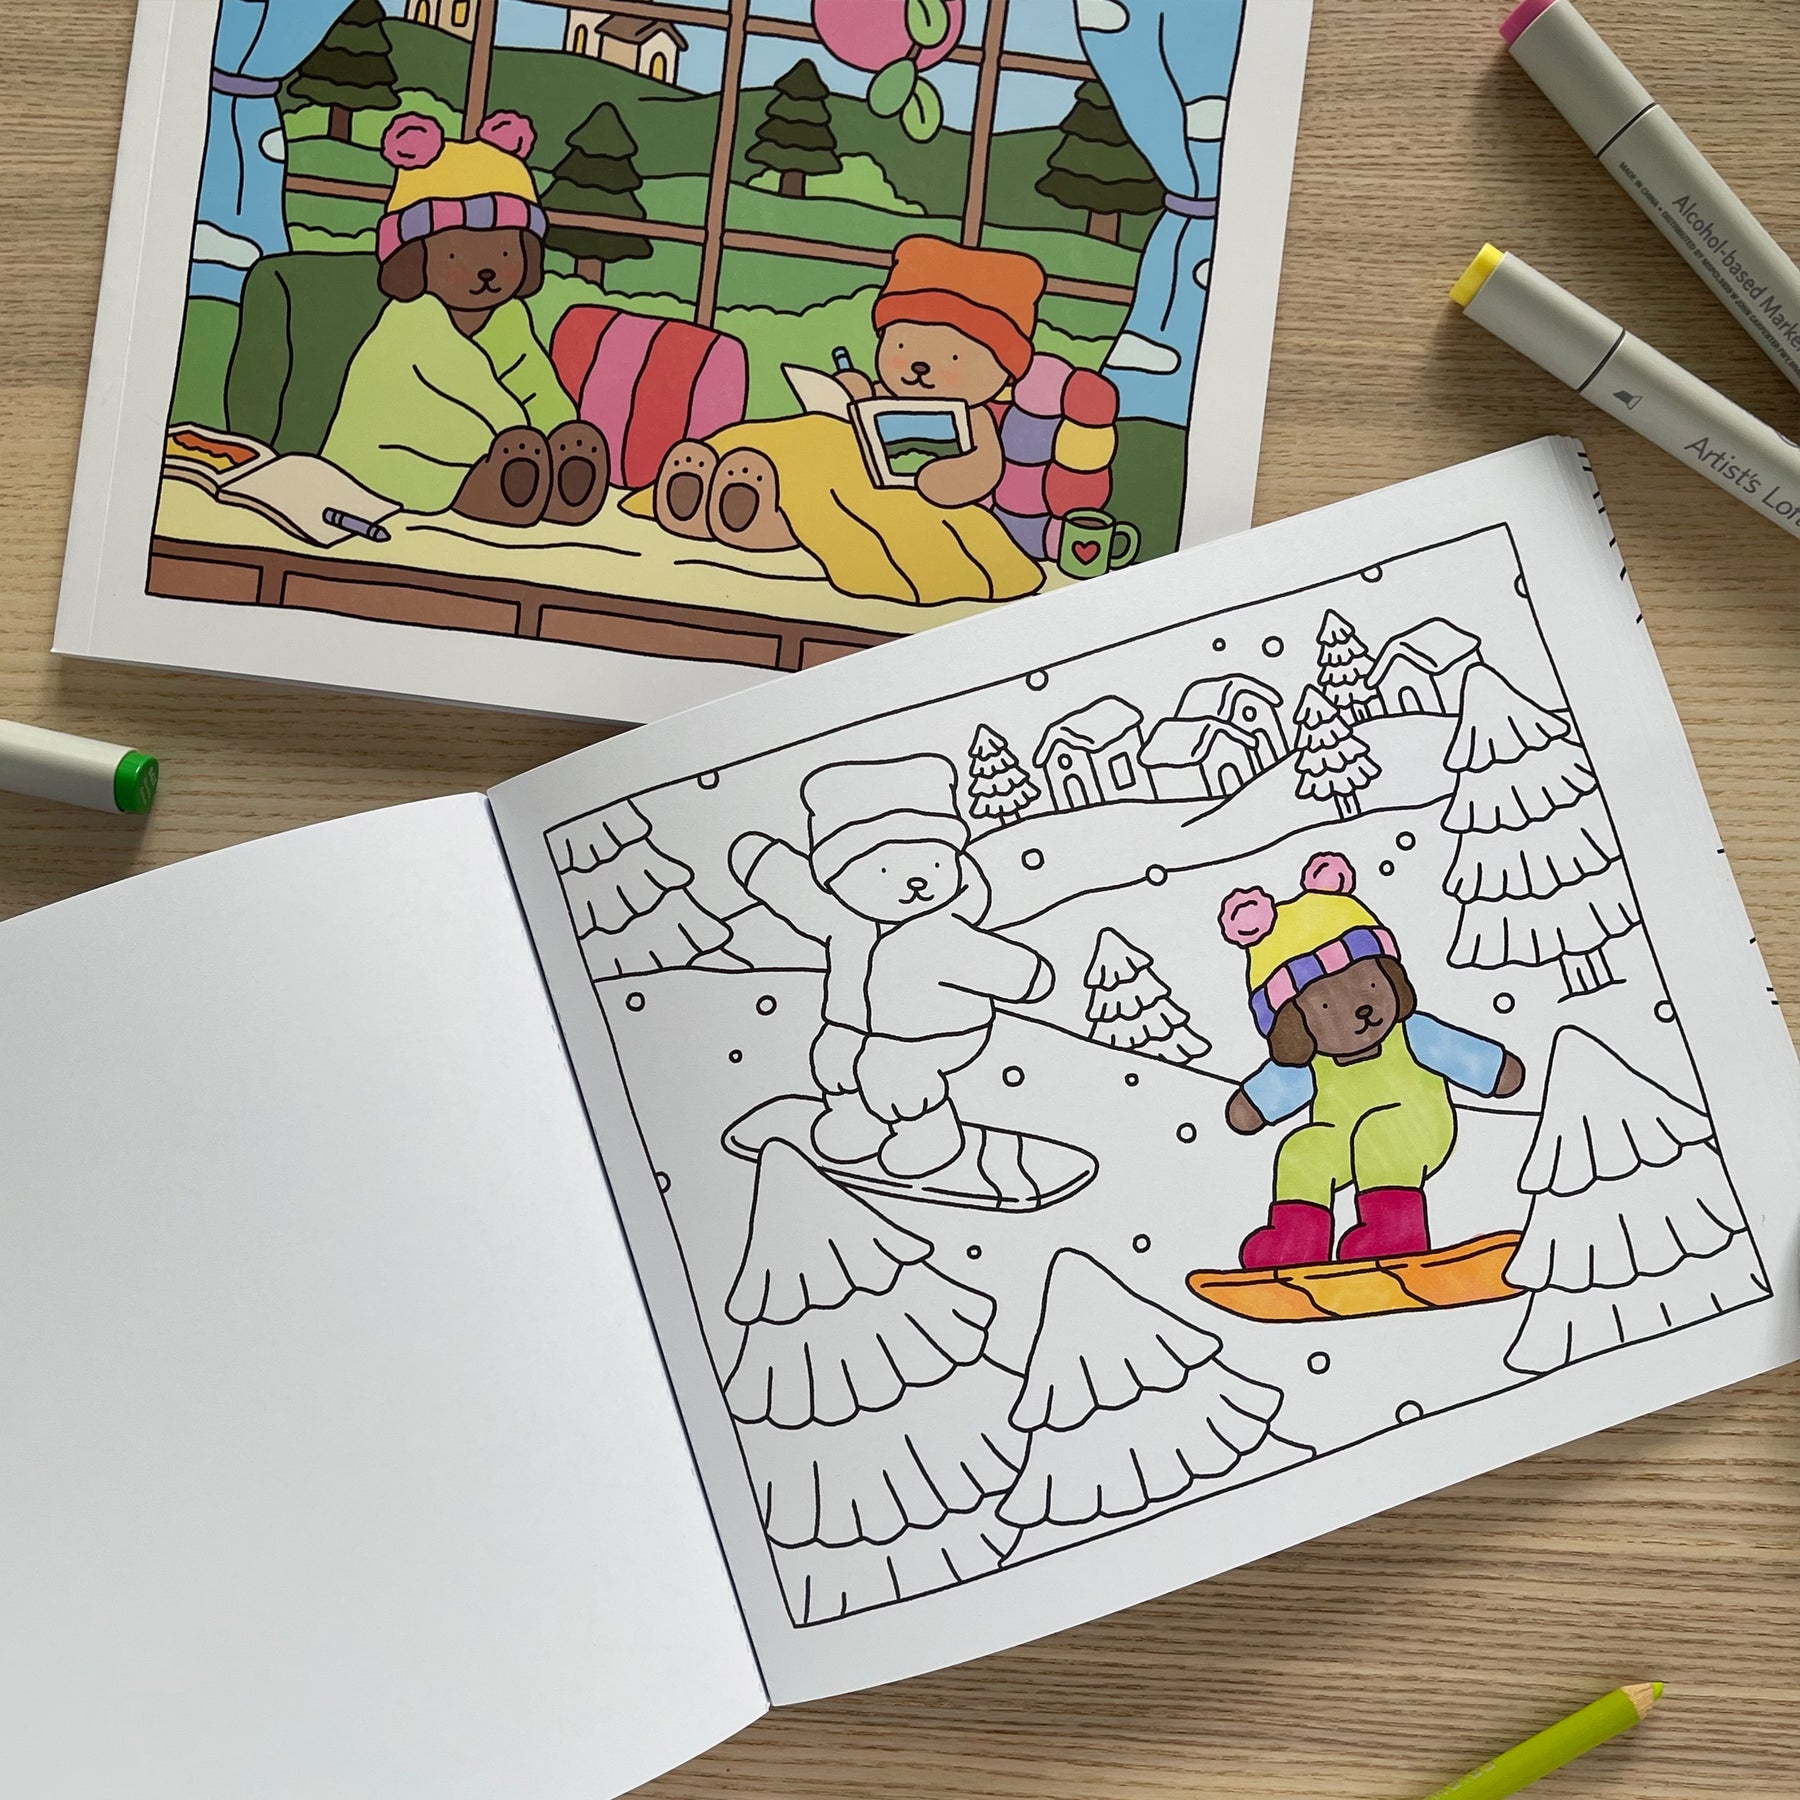 My finished Bobbie Goods coloring book : r/Coloring